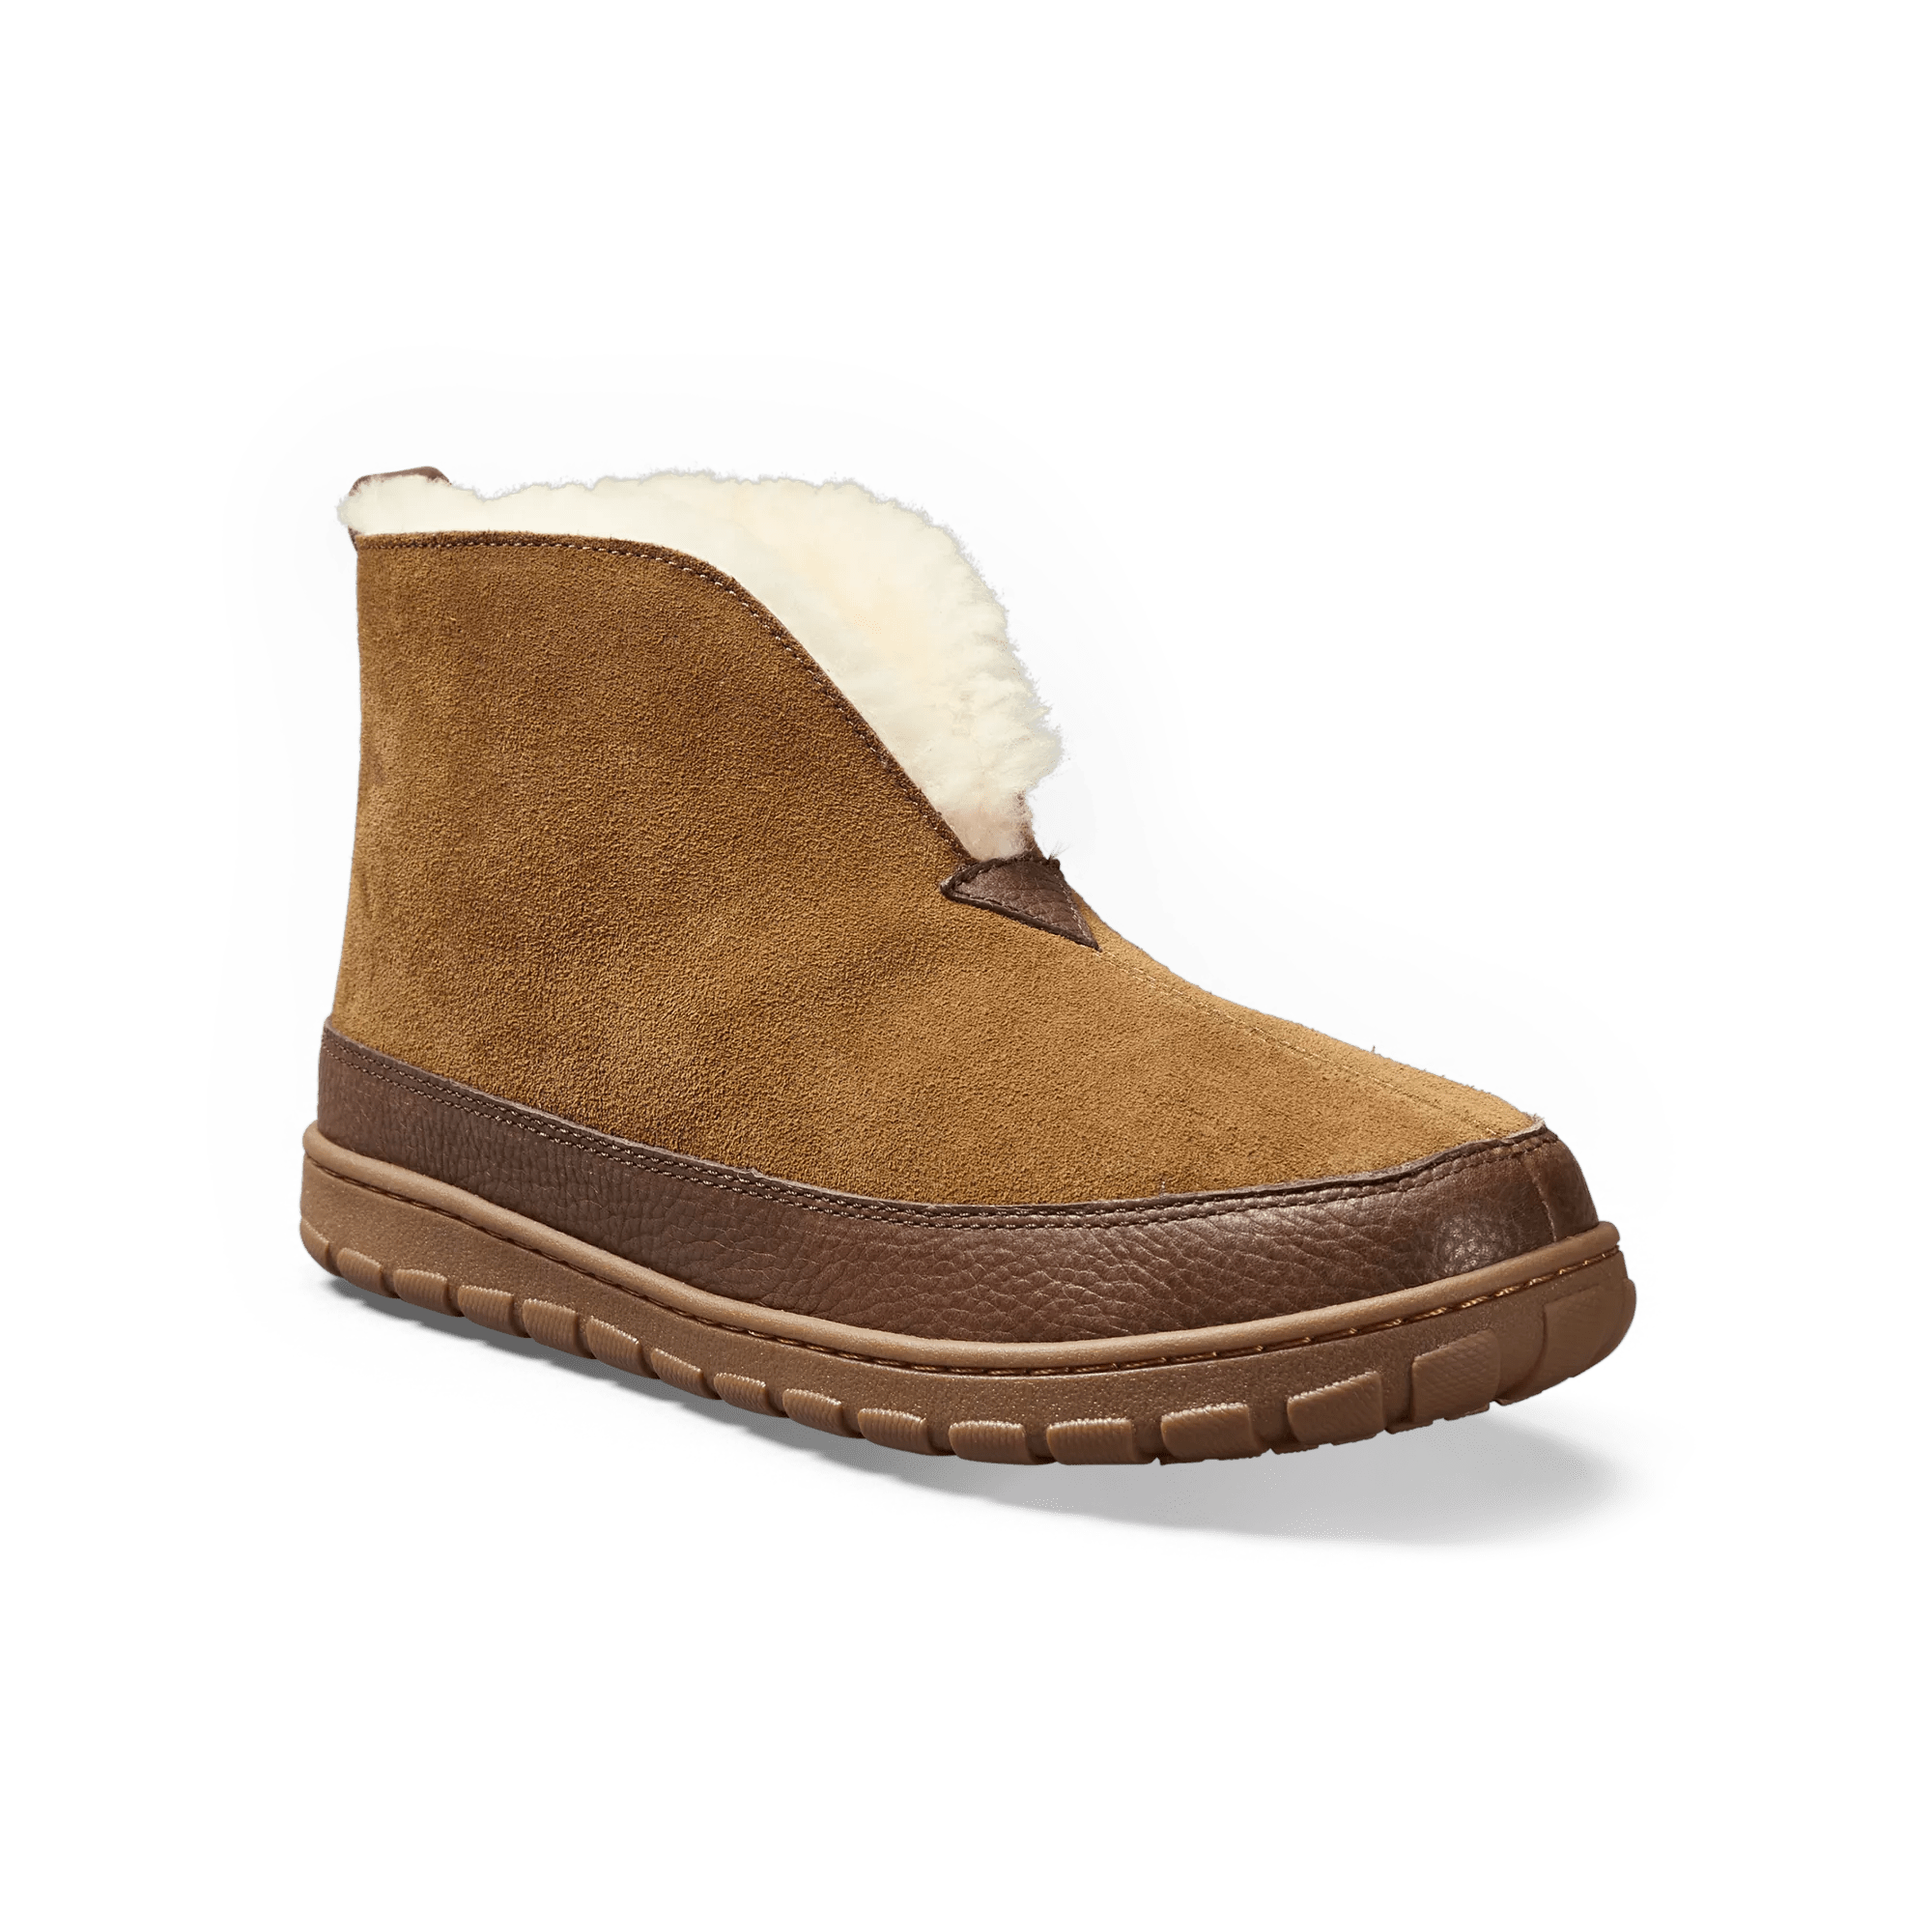 Shearling Boot Slippers